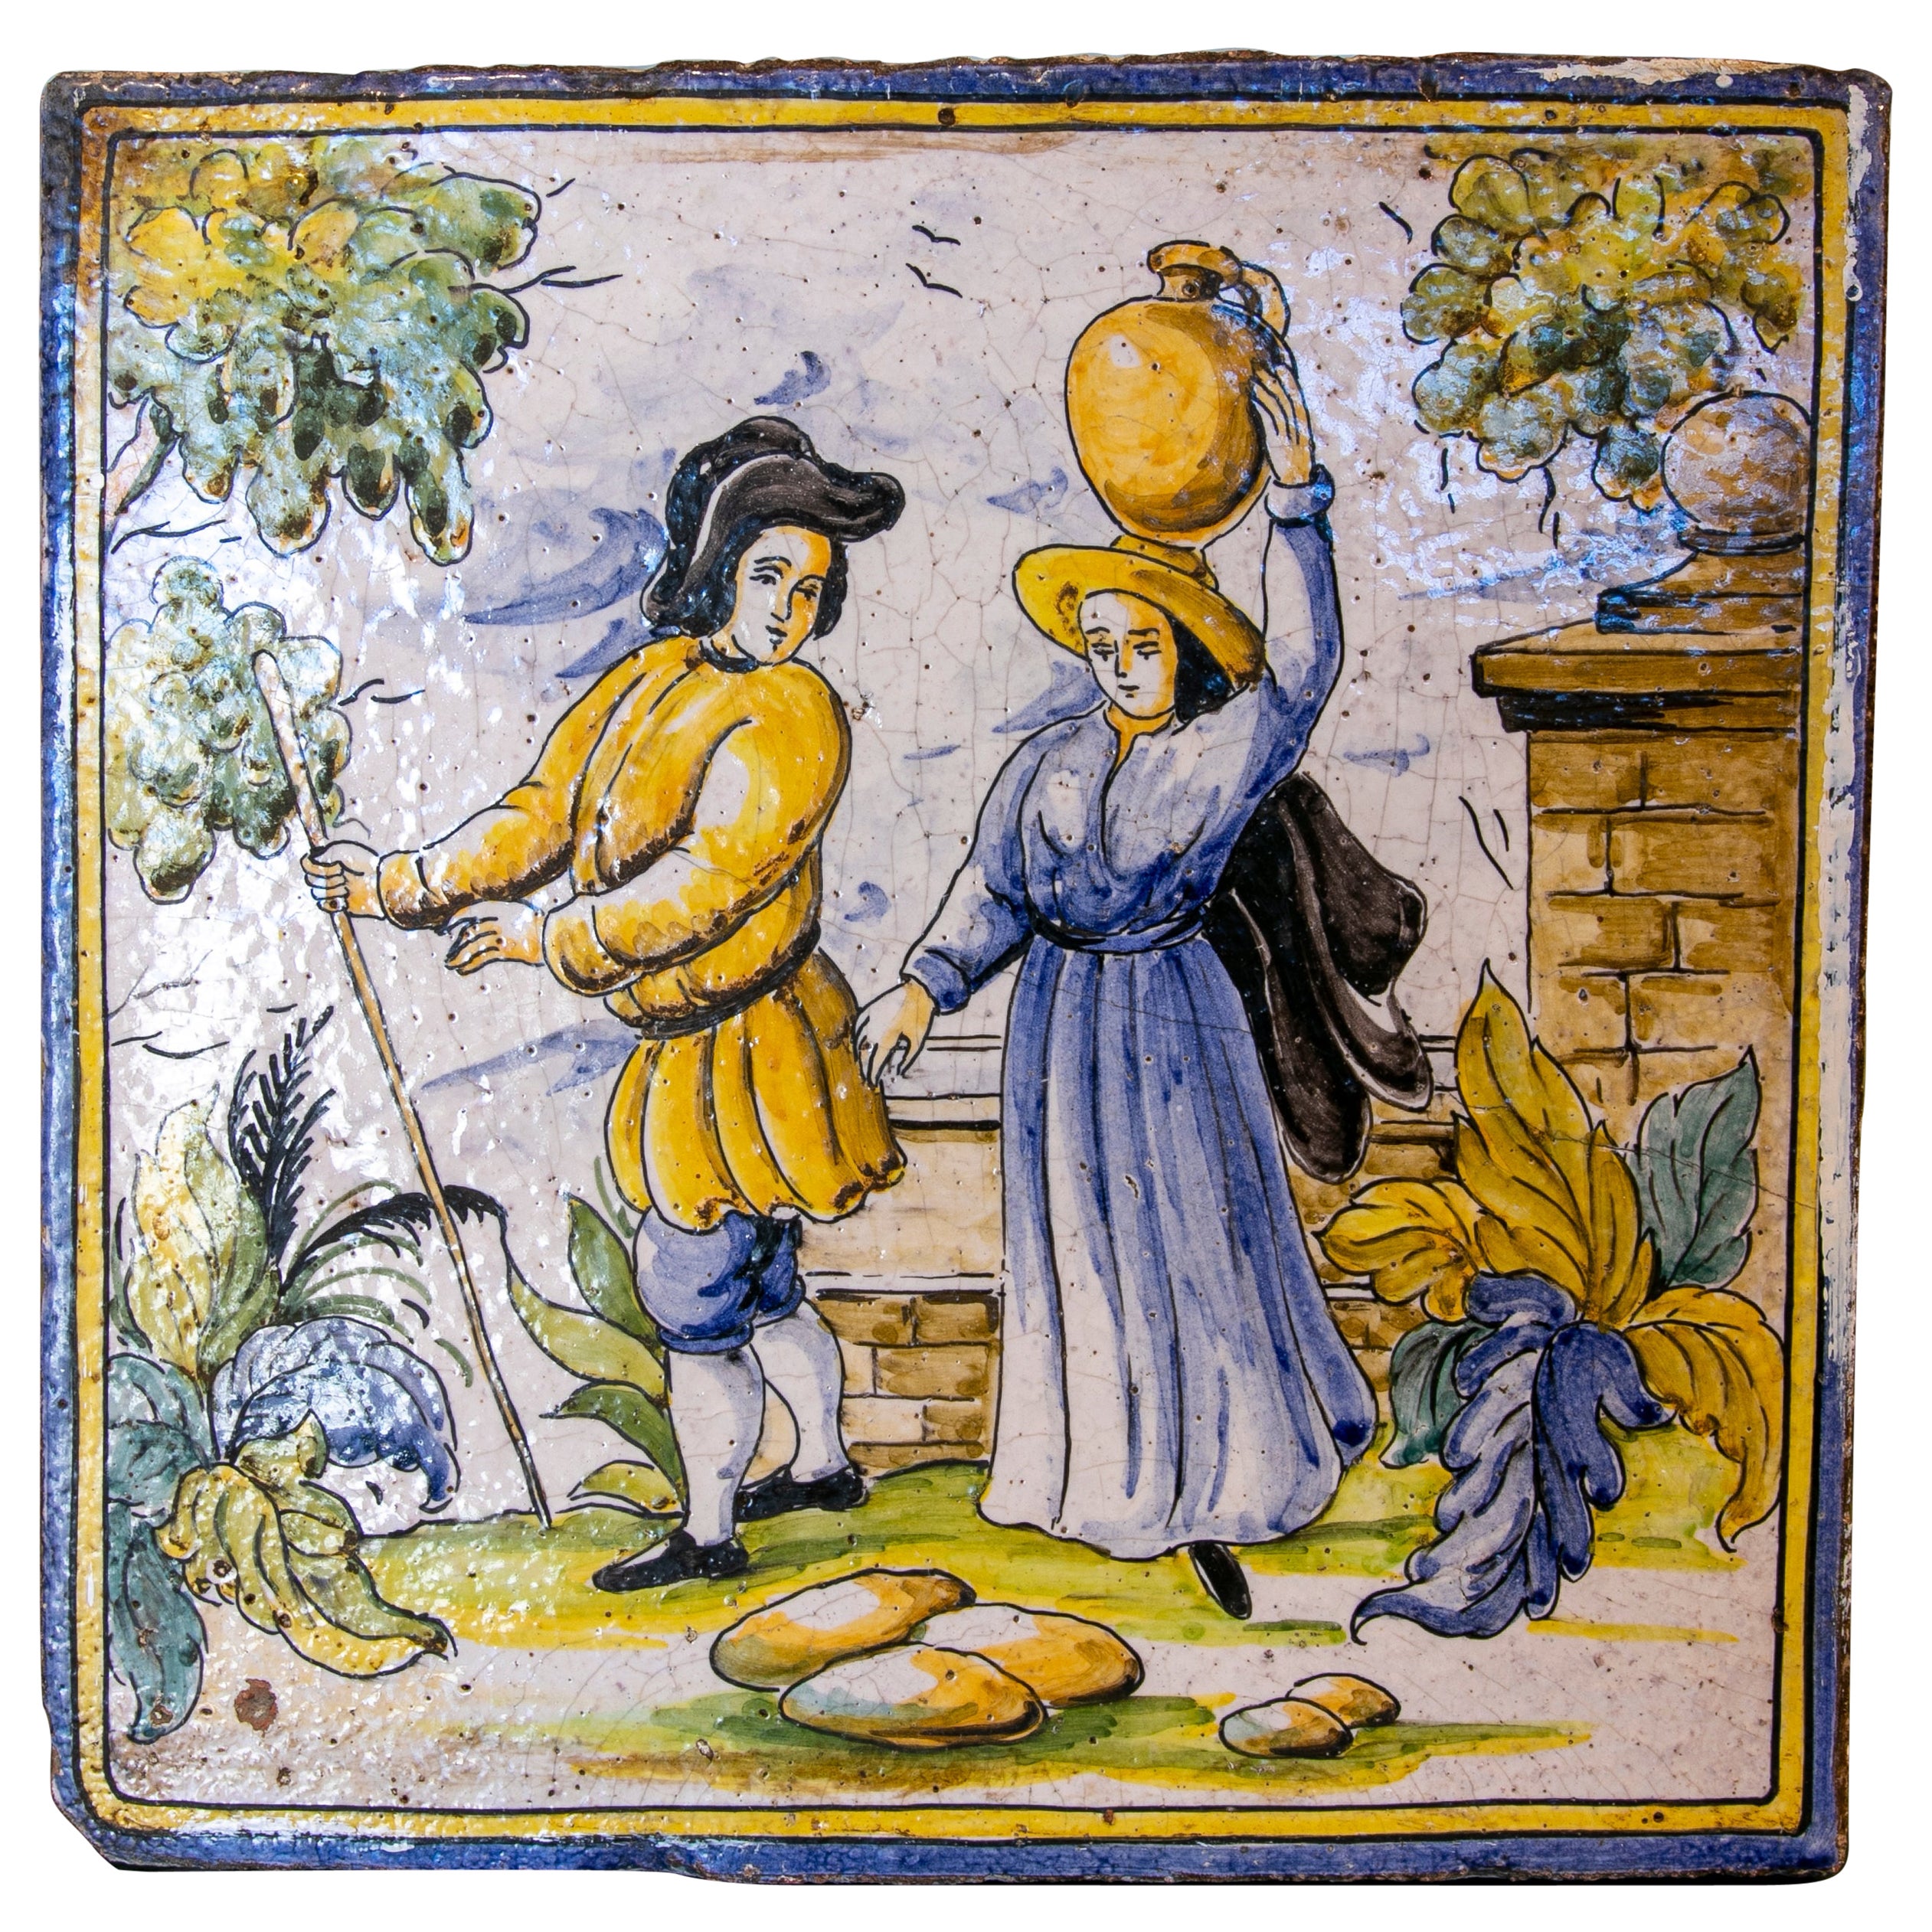 1970s Spanish Hand Painted Glazed Ceramic Tile with People Scene